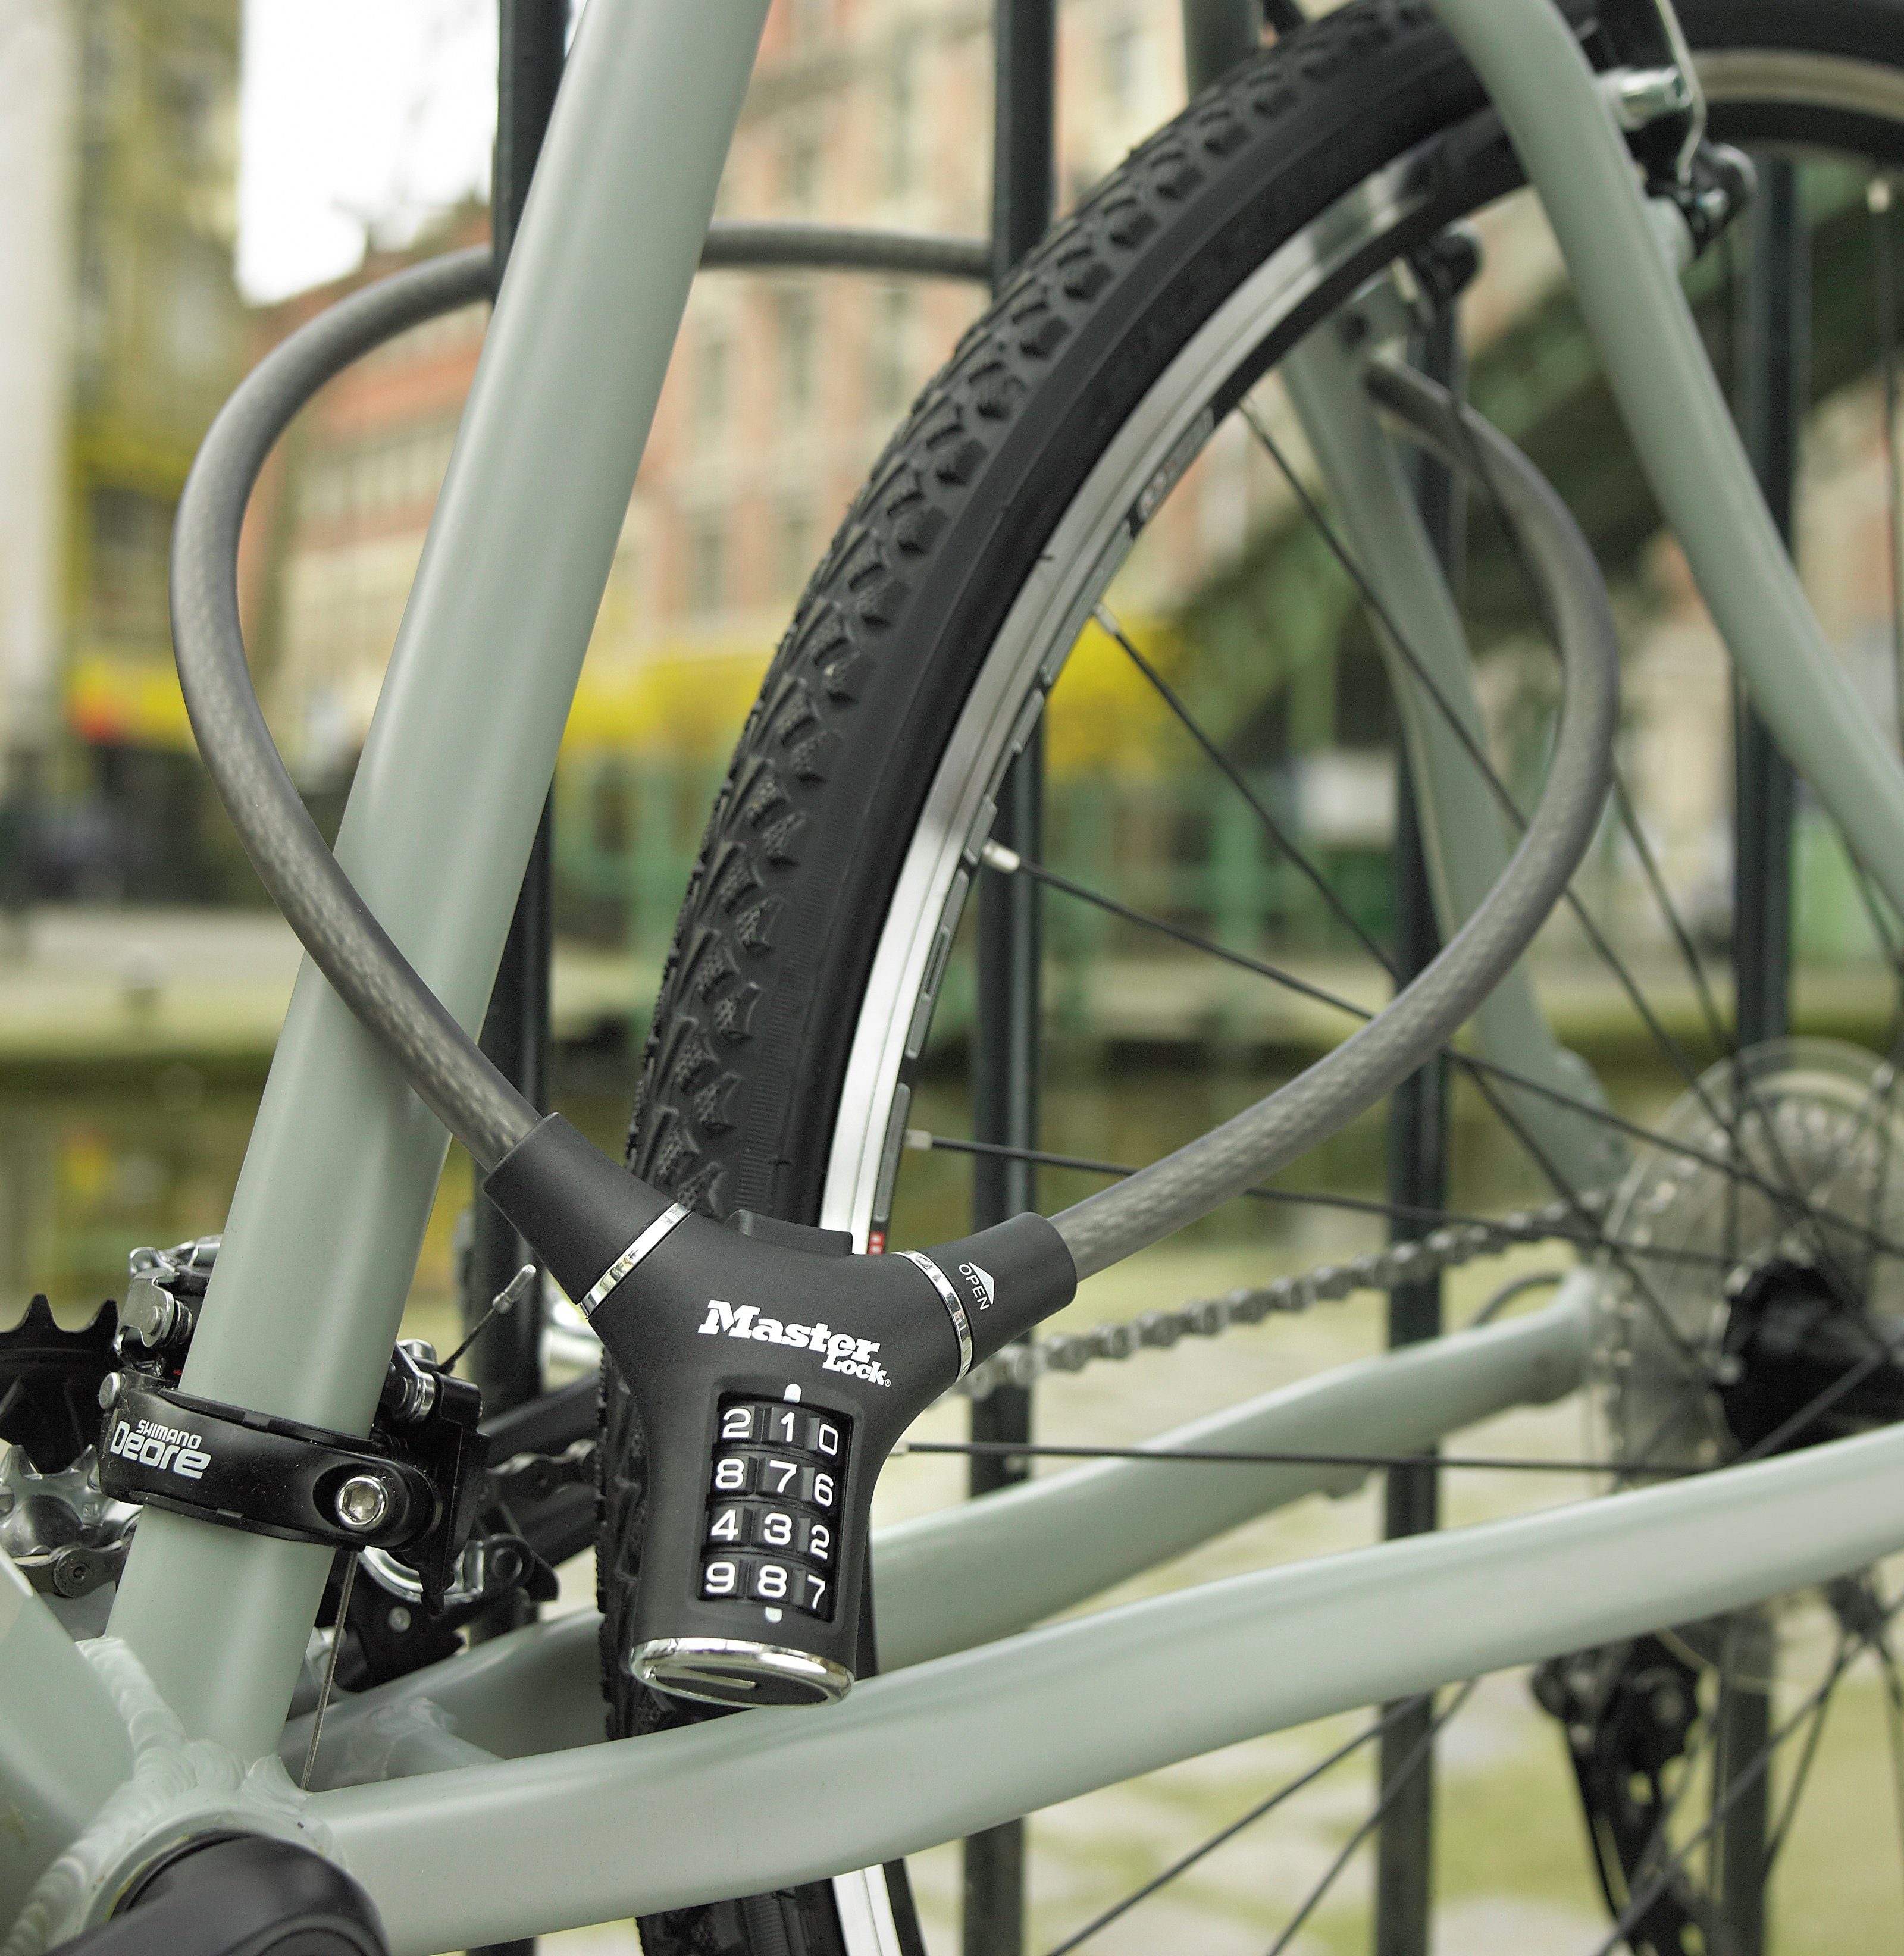 Master Lock - 90cm x 12mm Cycle Cable Lock Review